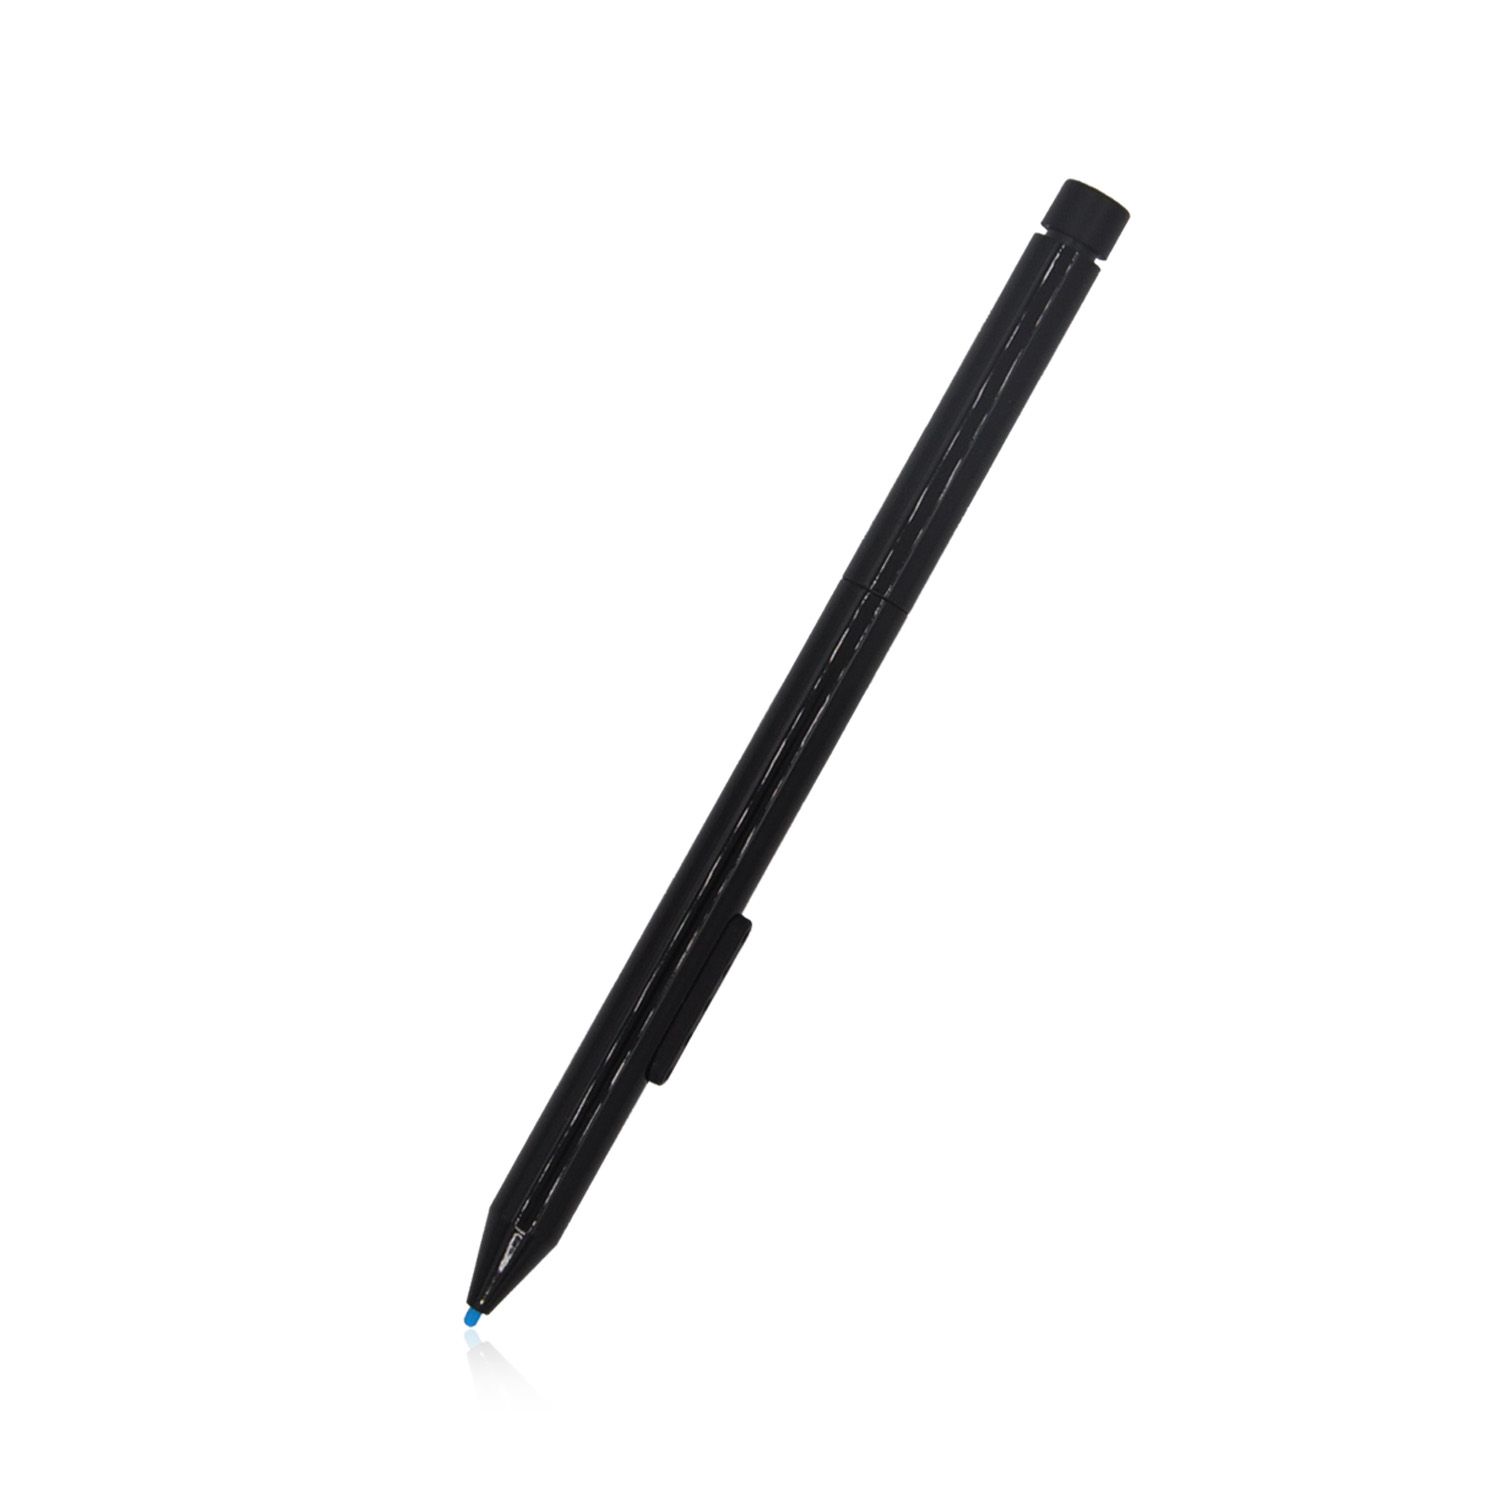 Zodiac Pen Box N-Trig Surface Stylus Pen with Eraser Button for Microsoft Surface Pro 1 and Surface Pro 2